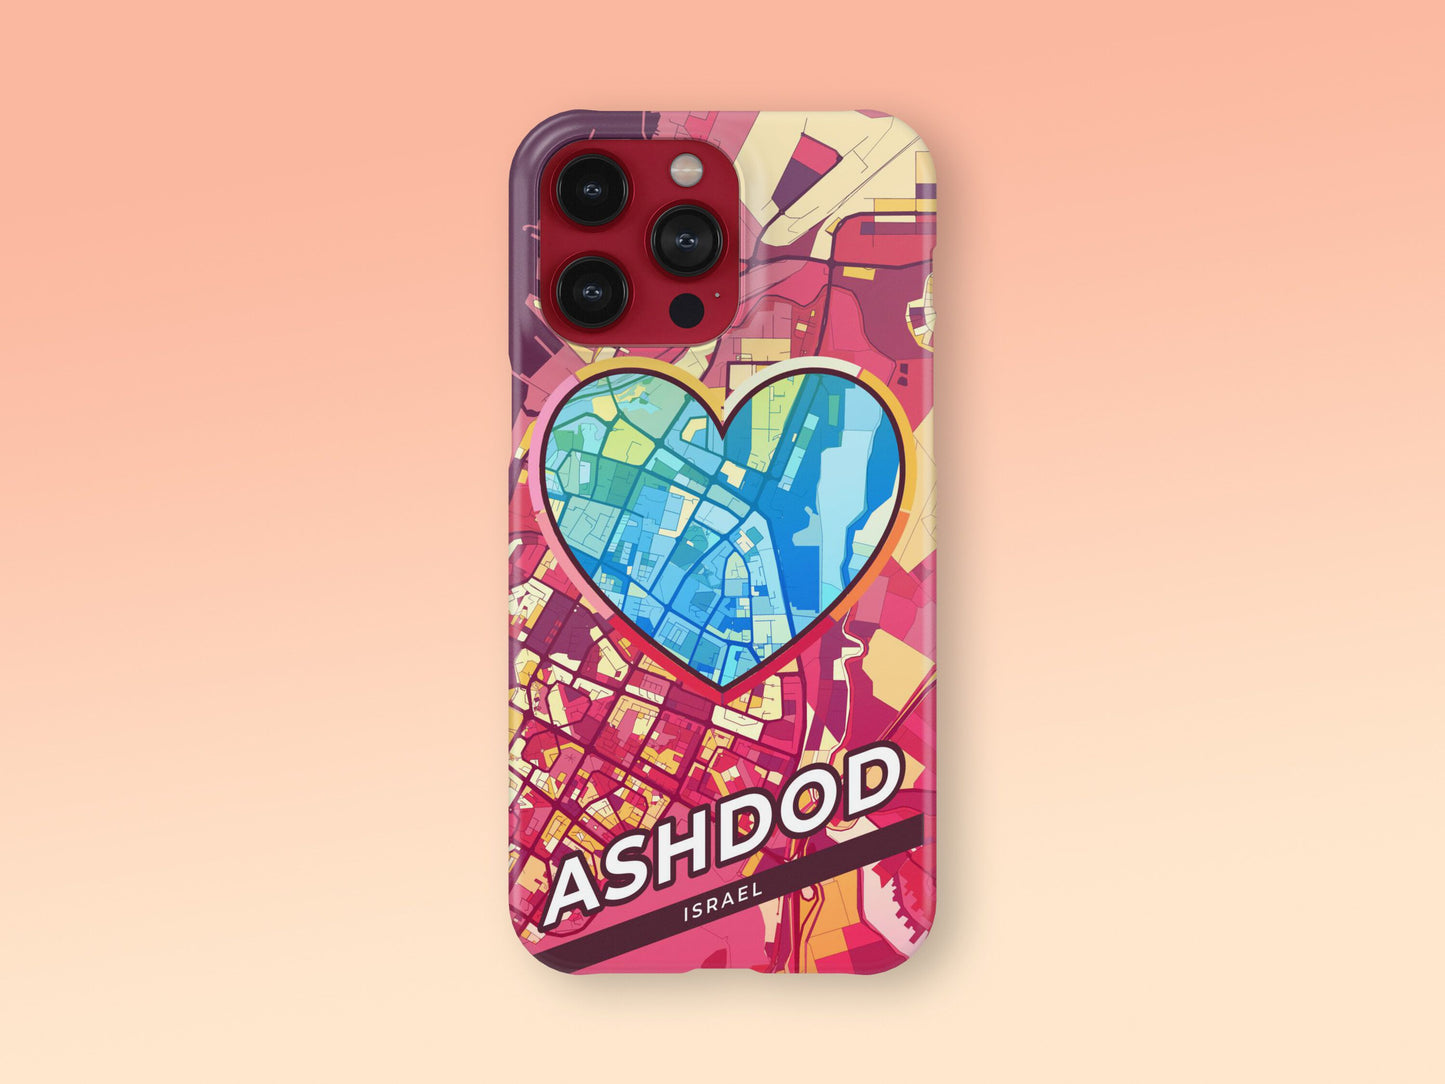 Ashdod Israel slim phone case with colorful icon. Birthday, wedding or housewarming gift. Couple match cases. 2